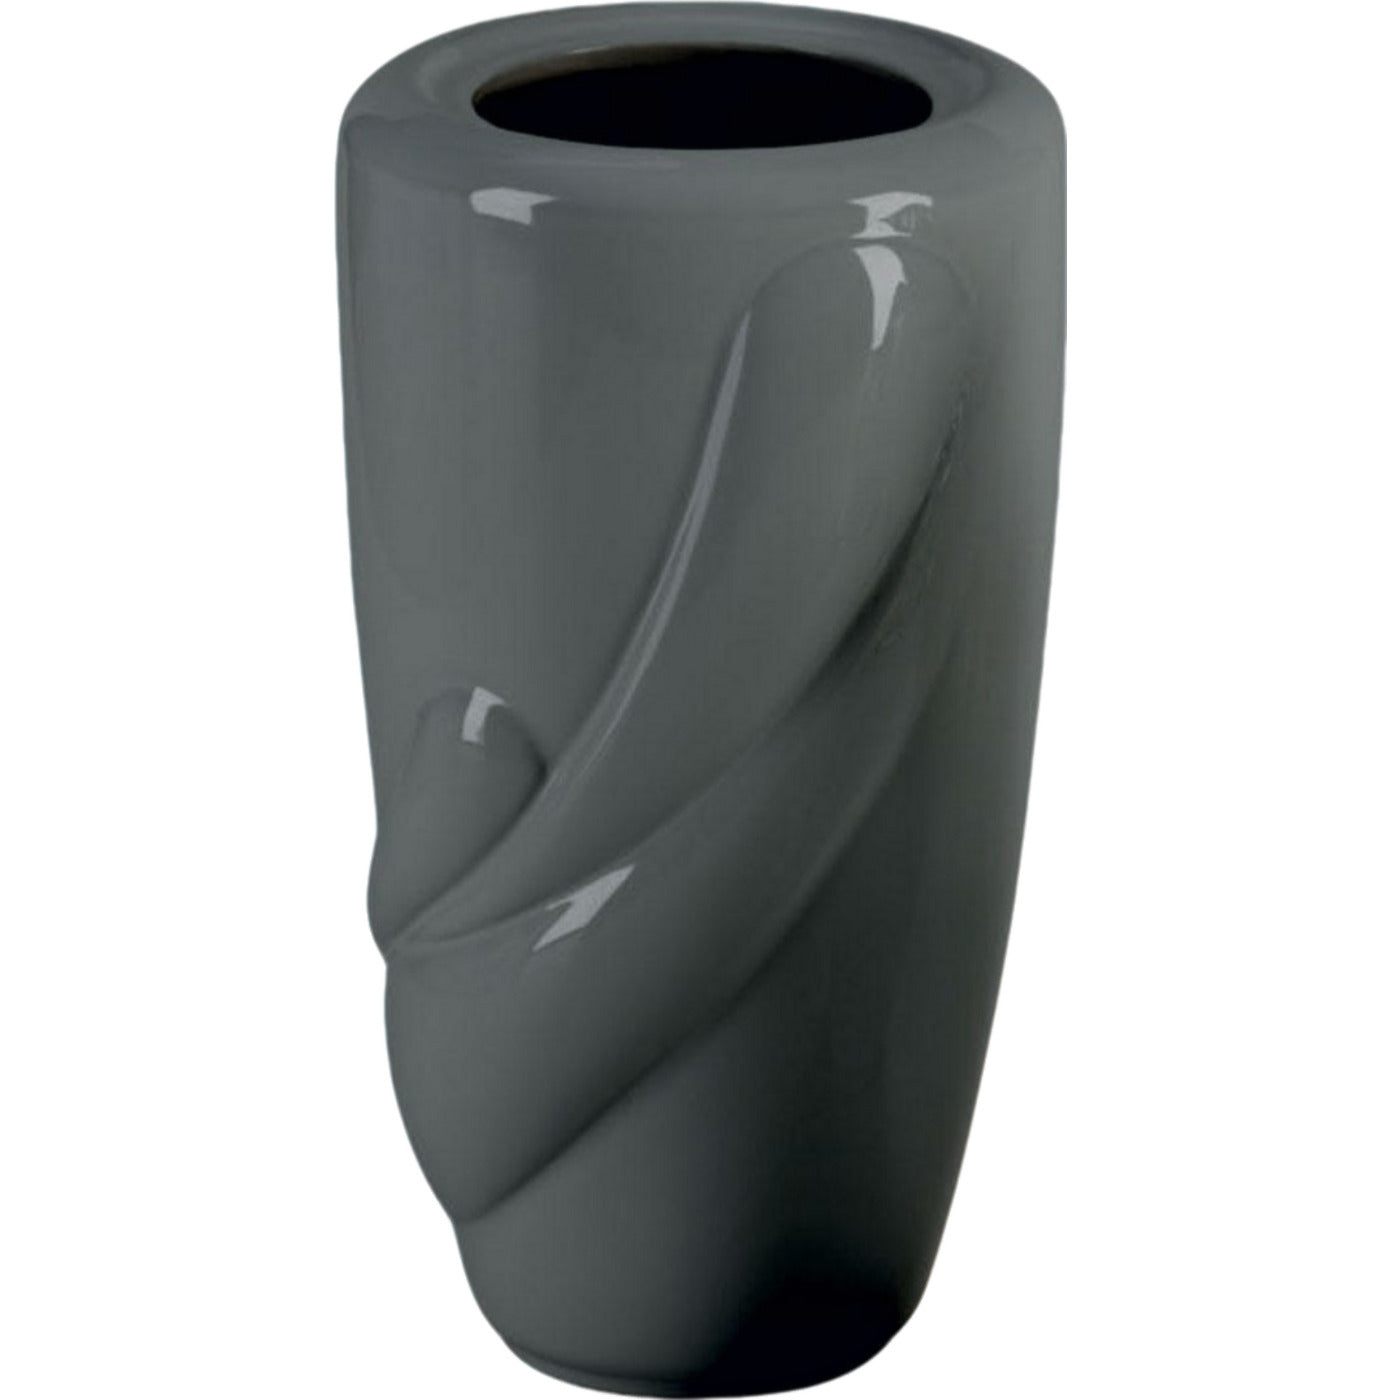 Grave vase Life gray 21x13cm - 8.3x5.1in In gray porcelain, wall attached LIF154P/G